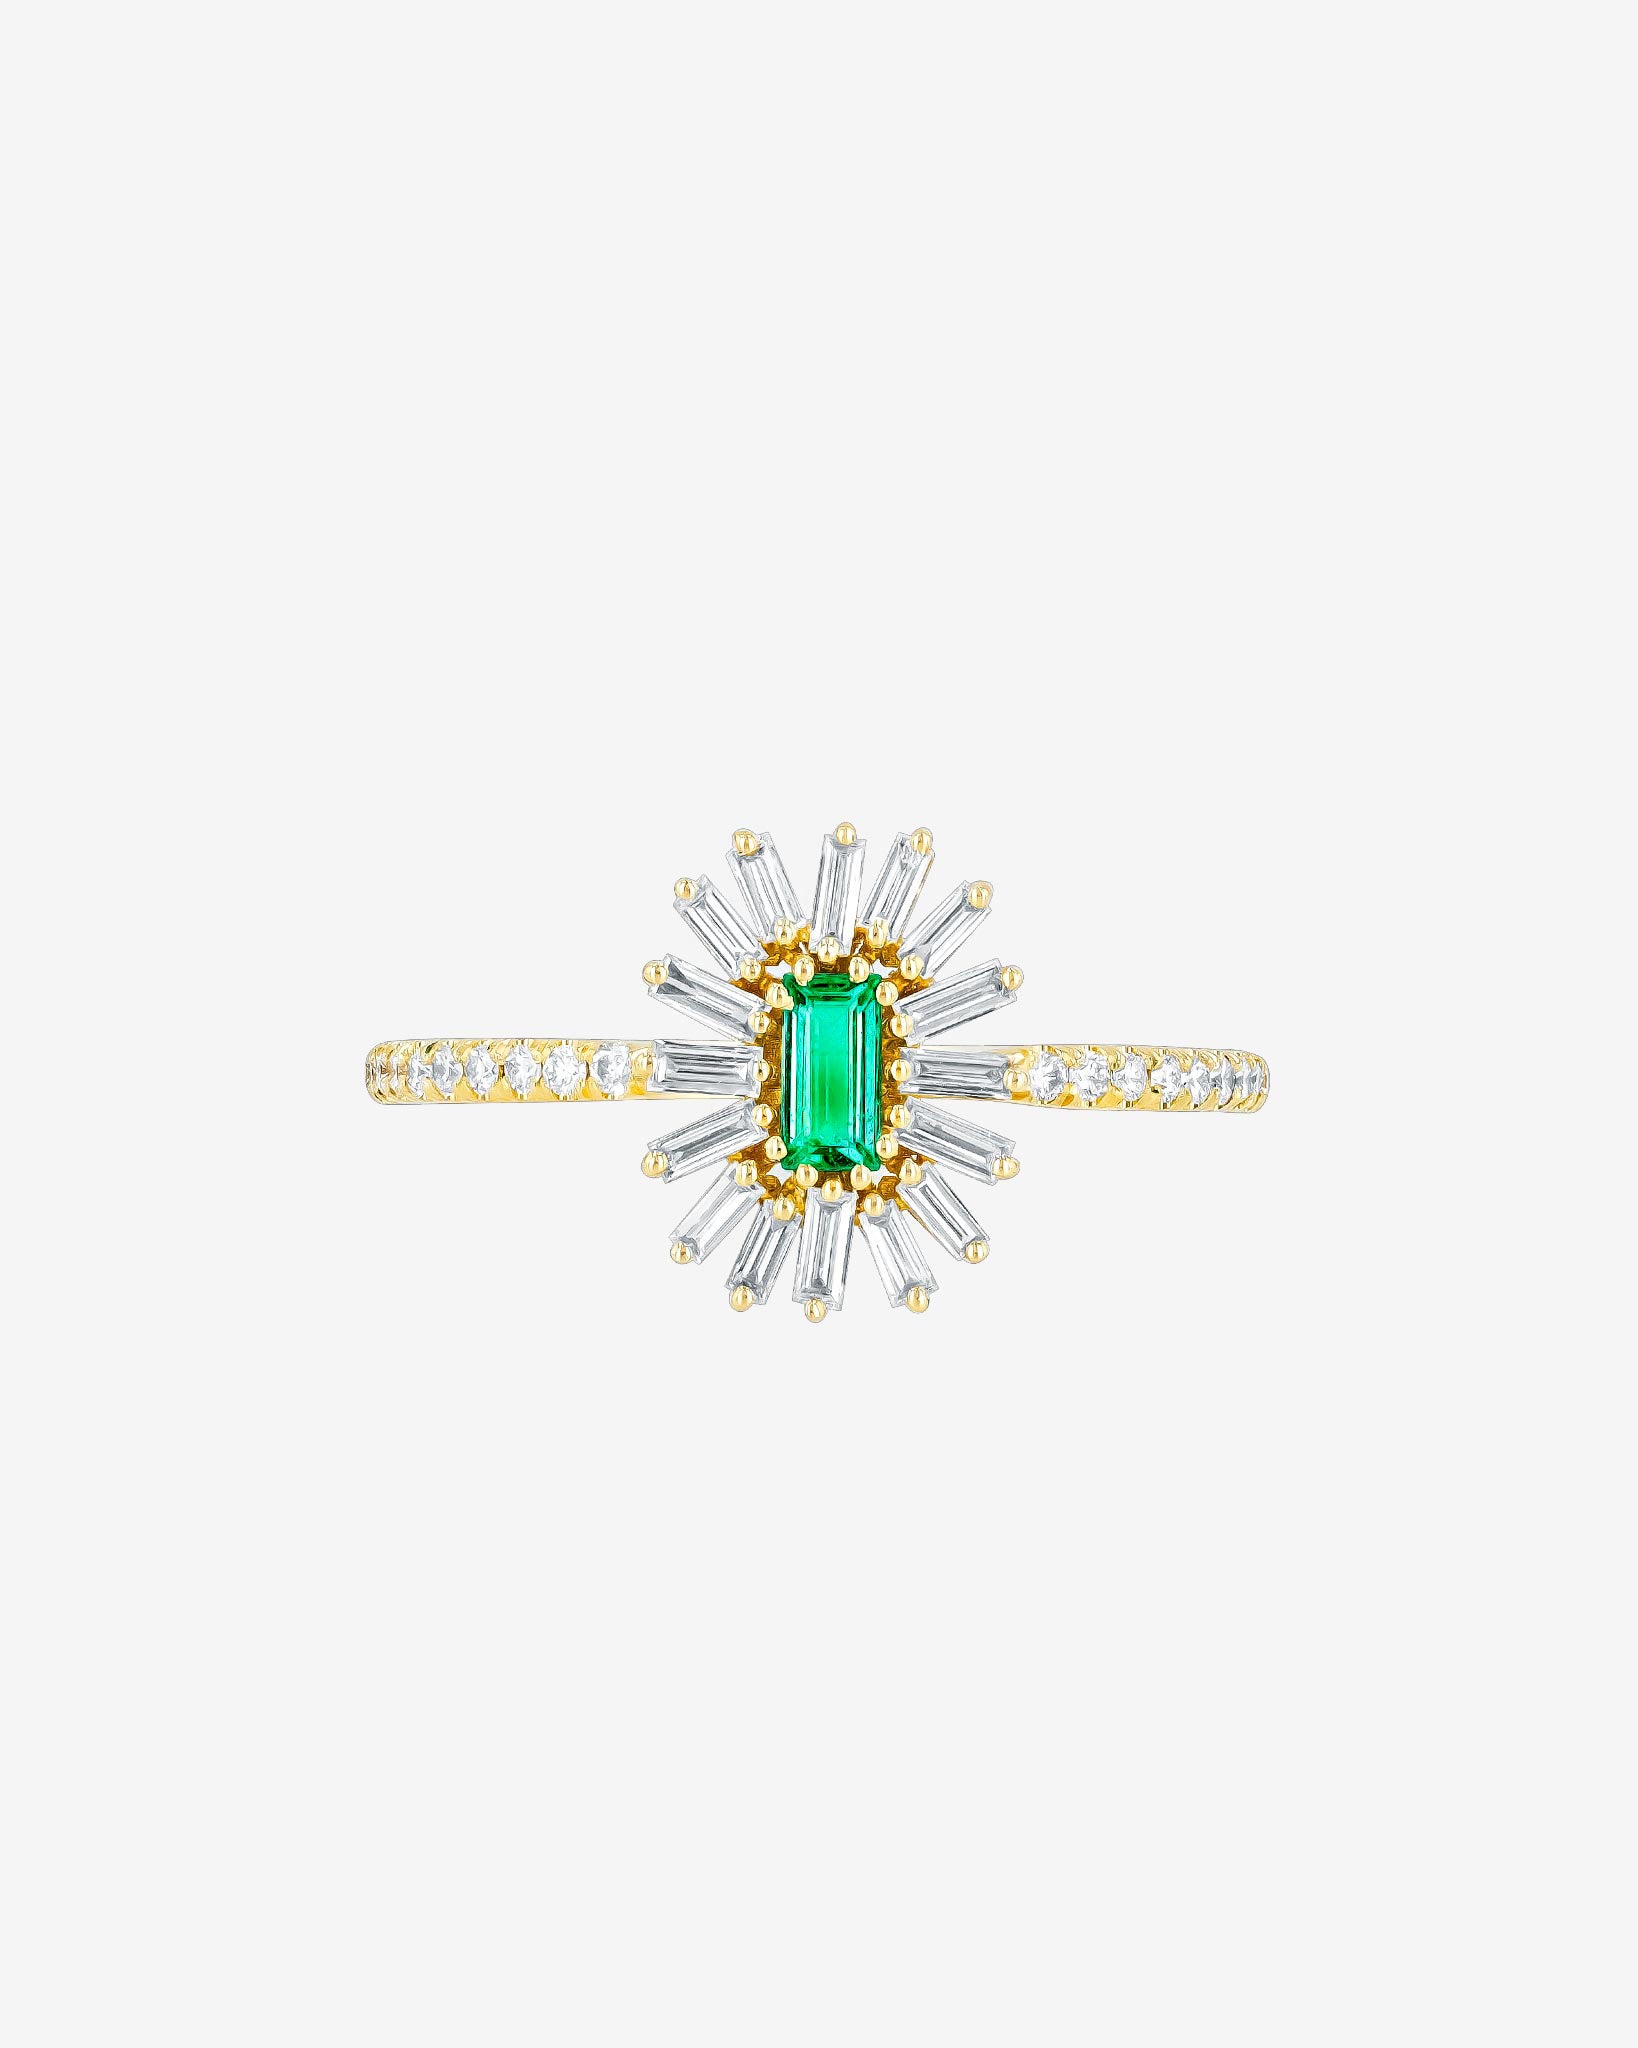 Suzanne Kalan Bold Emerald Spark Ring in 18k yellow gold